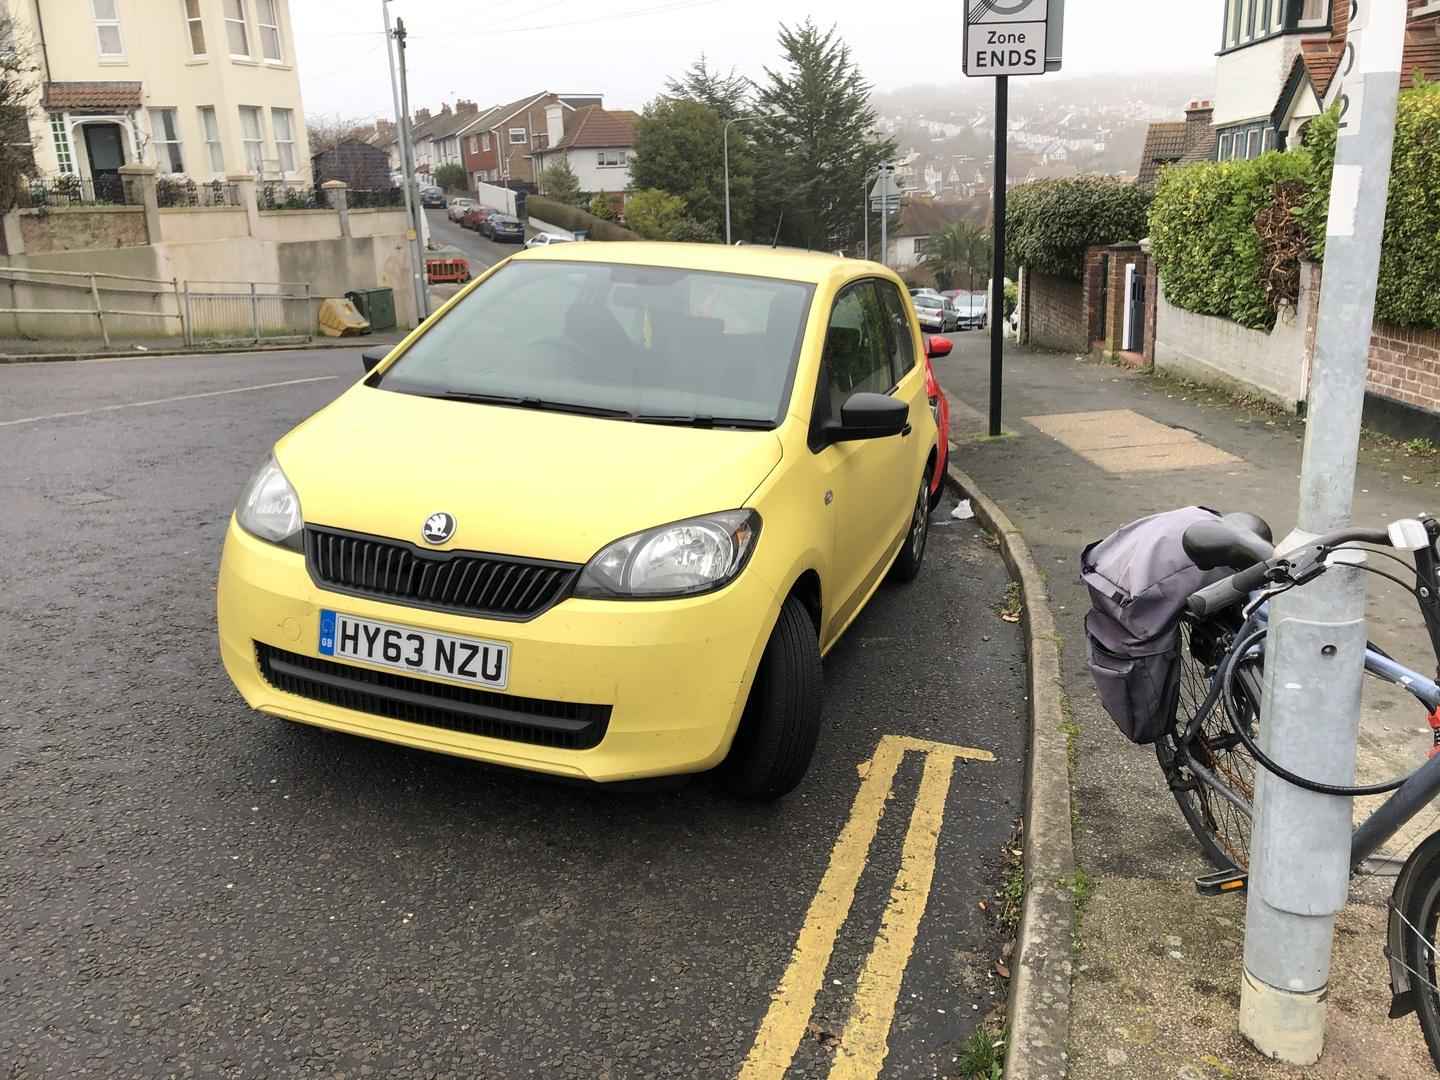 Photograph of HY63 NZU - a Yellow Skoda Citigo parked in Hollingdean by a non-resident. The first of four photographs supplied by the residents of Hollingdean.